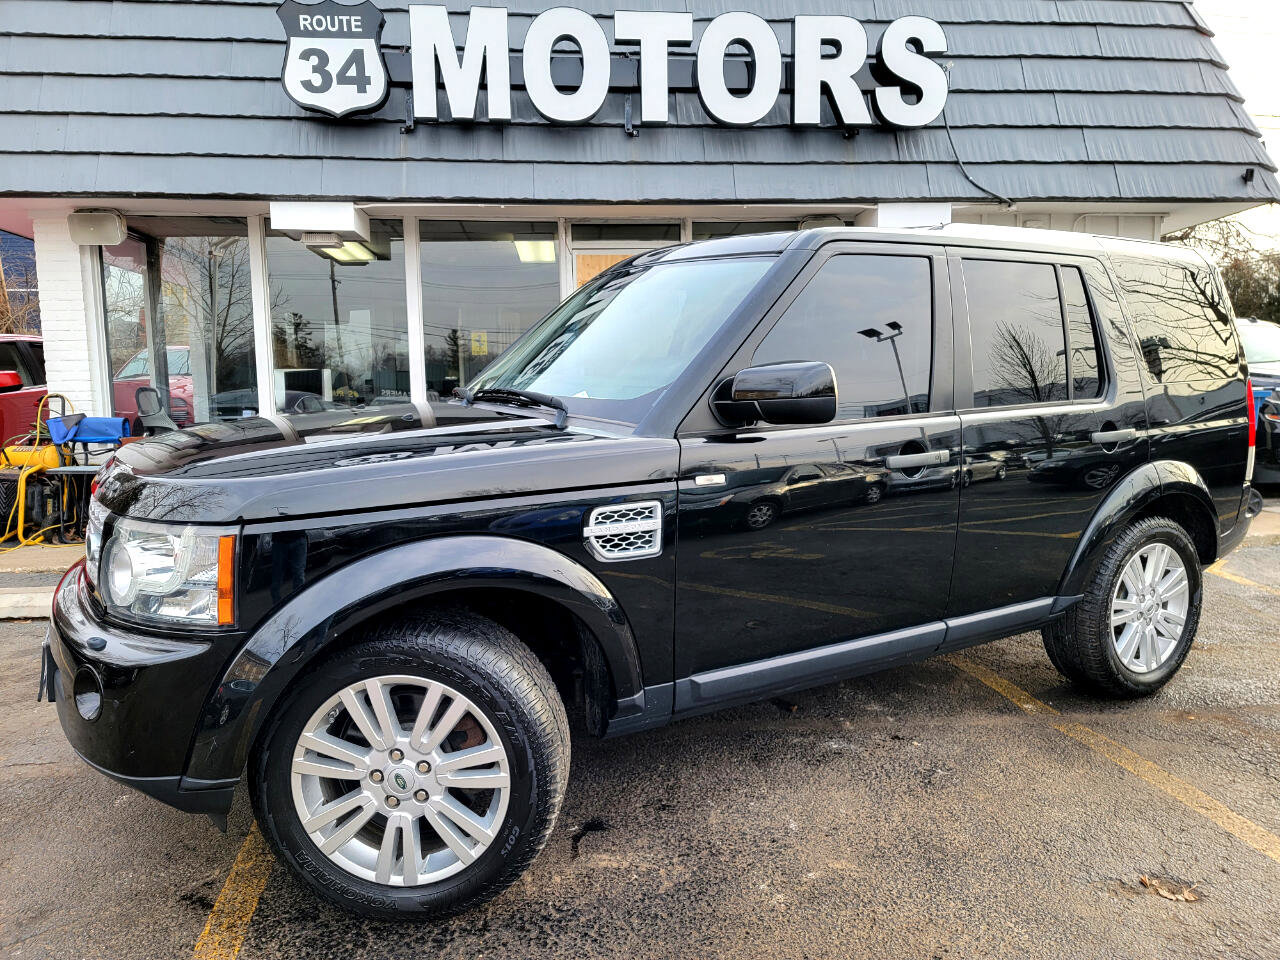 Used 2012 Land Rover LR4 for Sale Right Now - Autotrader